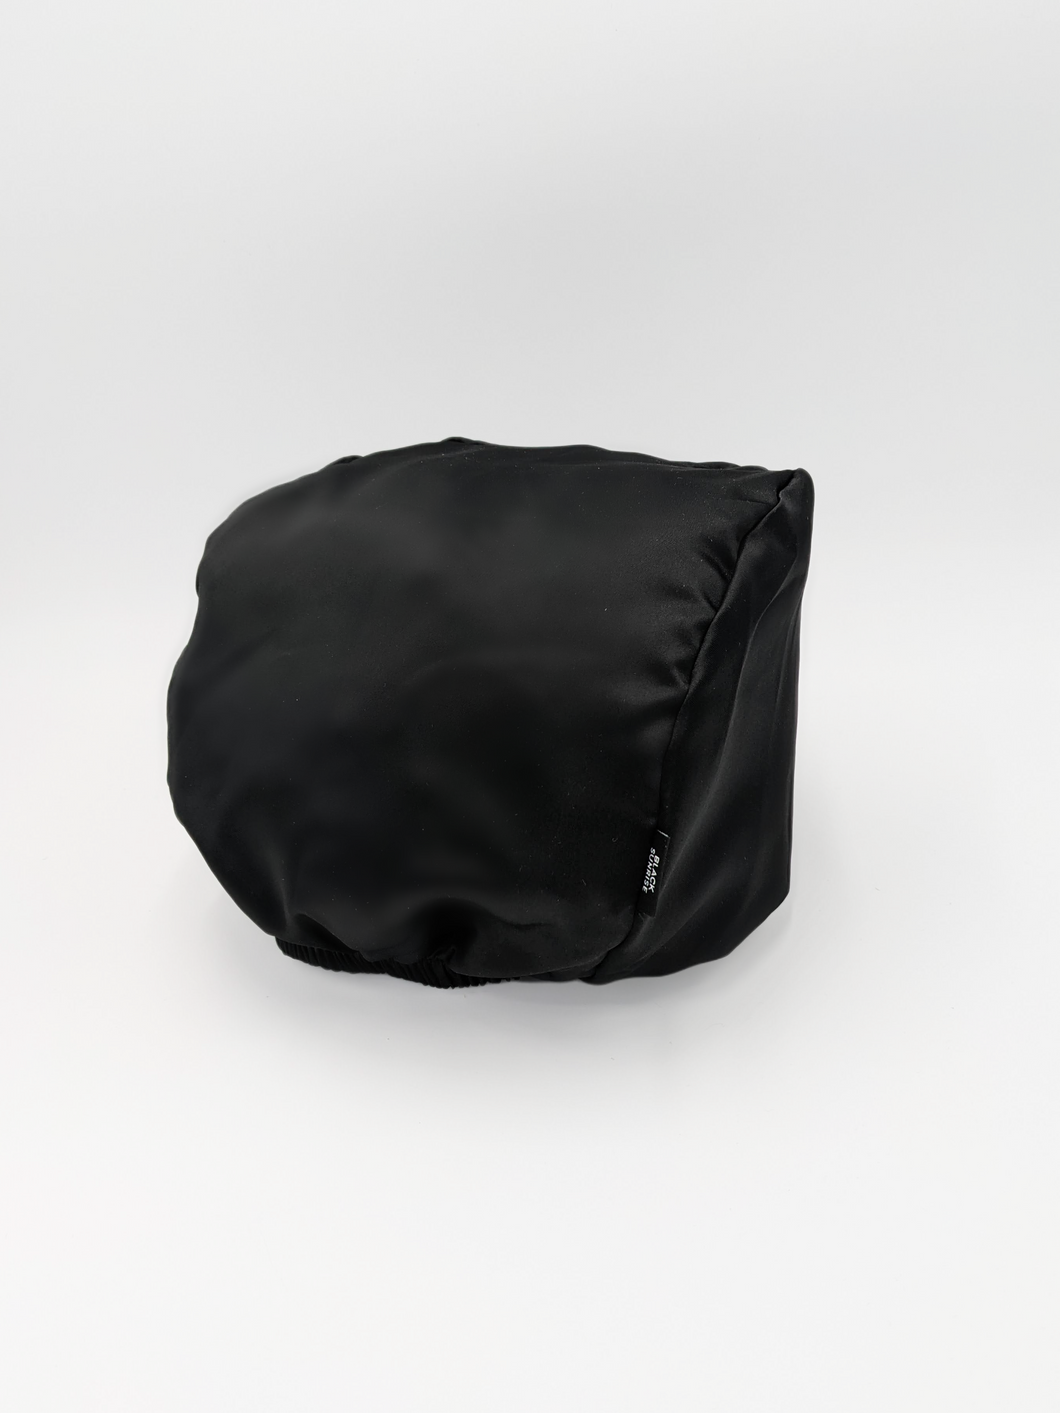 Satin Headrest Cover - Black Sunrise UK Satin Lined Hats,. Satin lined Beanie, Hoodies. For children, adults, babies. For those with curly natural hair, sensitive scalps and fragile curls.